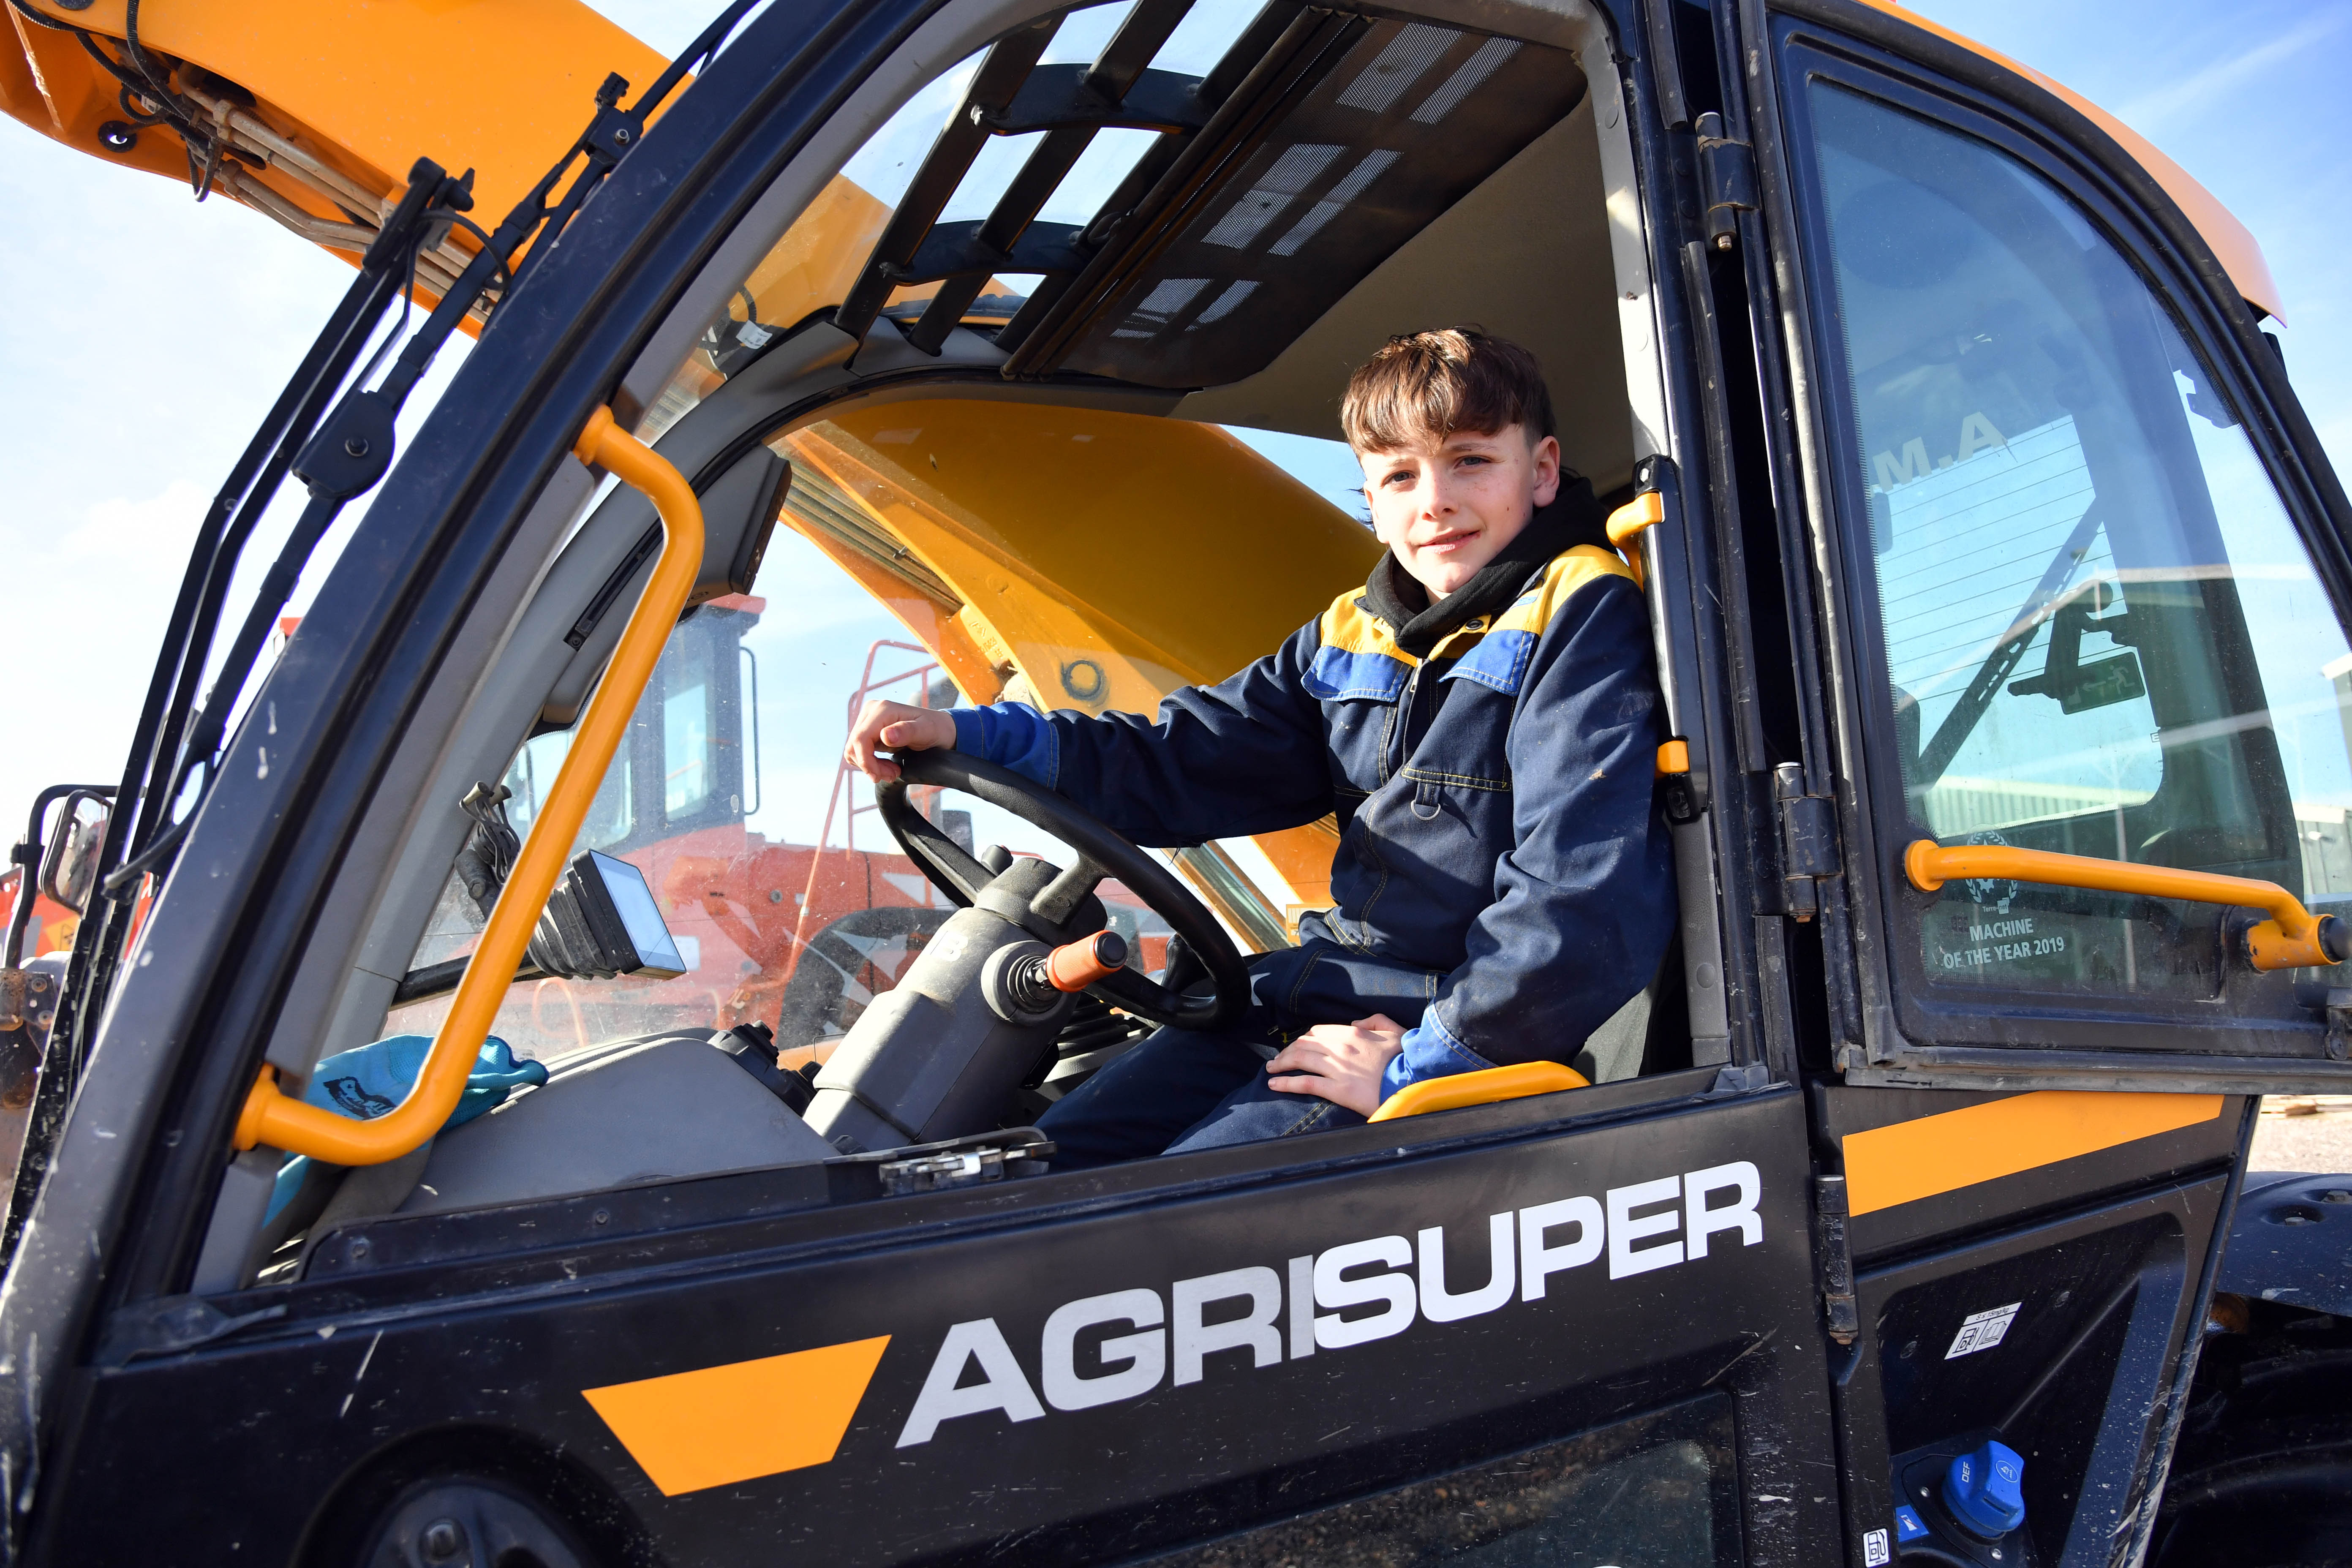 And finally... 13-year-old Jake proves truck driving is child's play